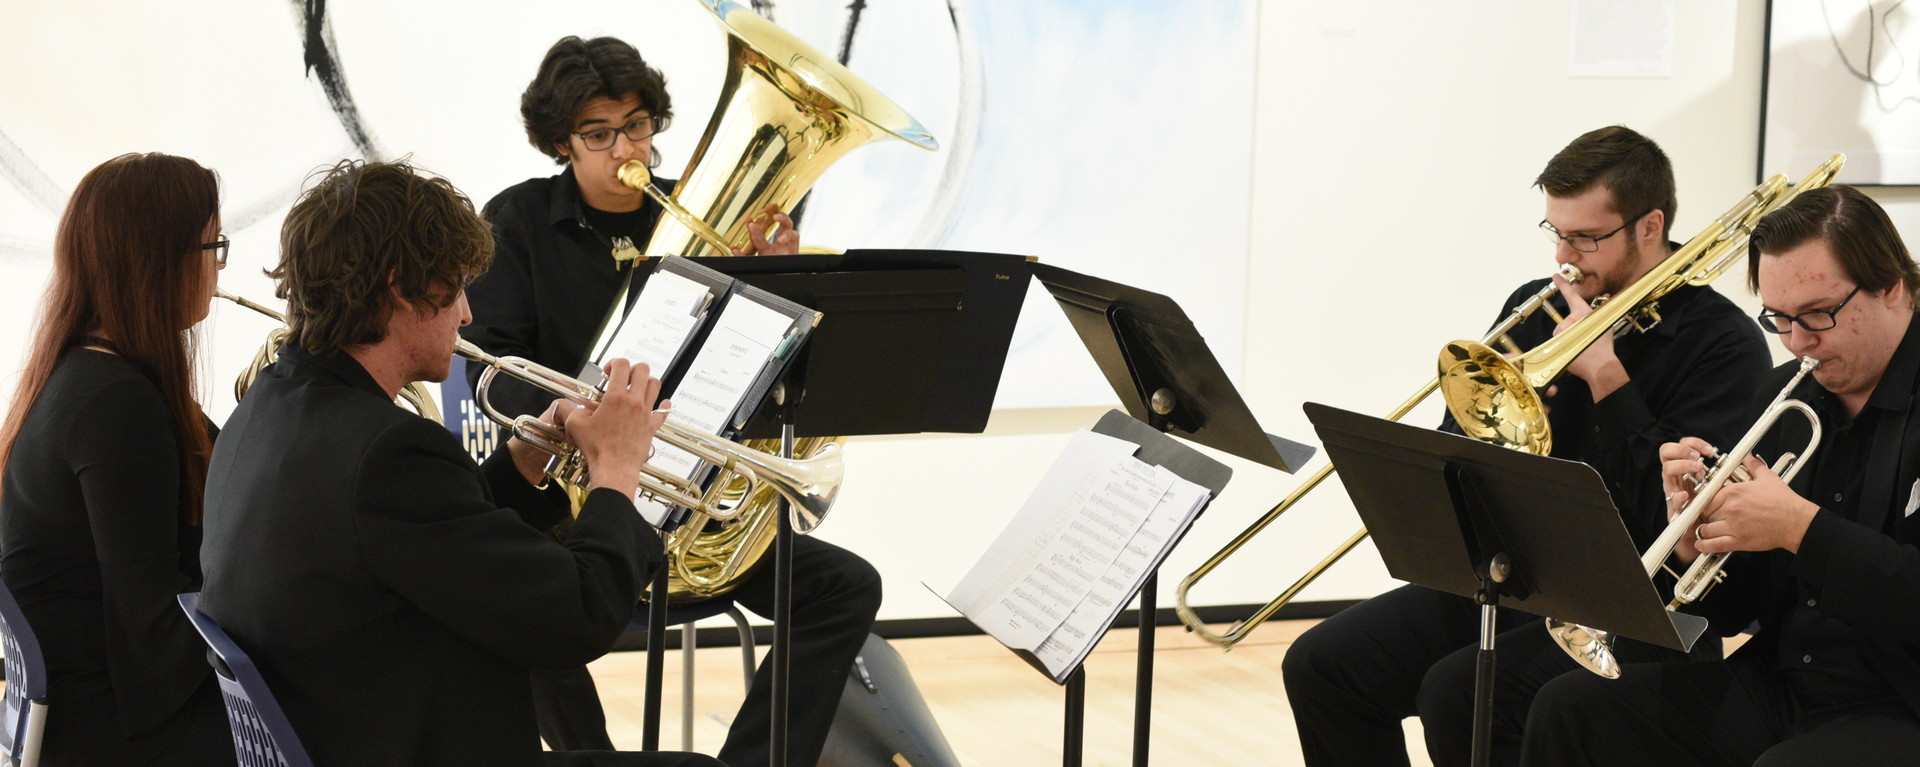 Students playing brass instruments in performance